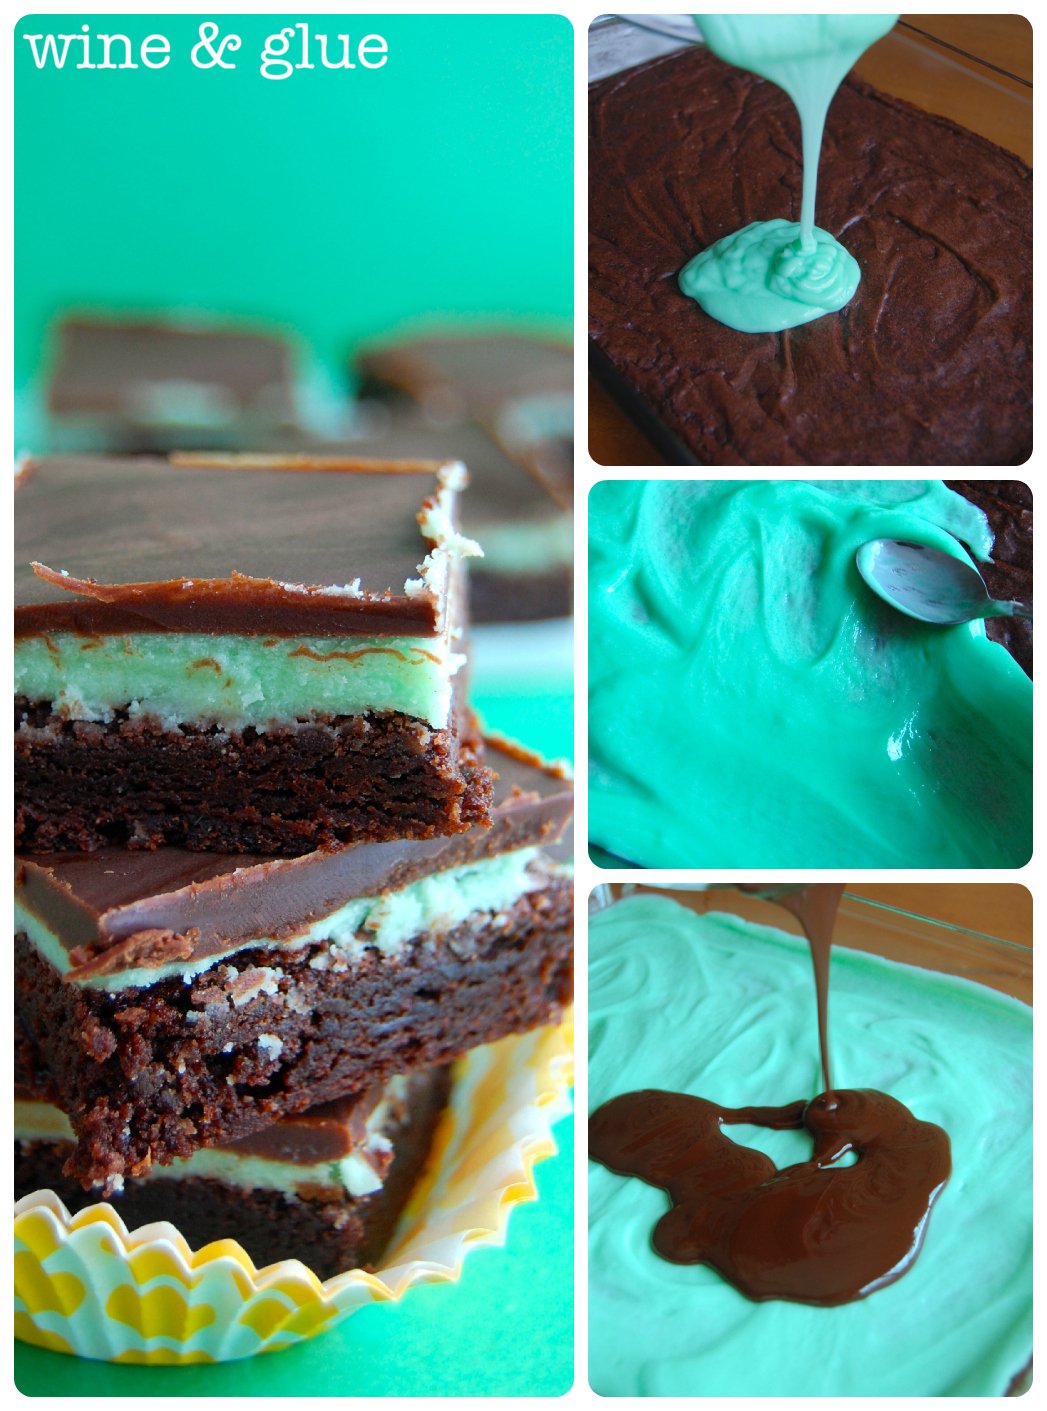  These Mint Chocolate Brownies are a family favorite! Everyone always asks for the recipe for these amazing brownies!